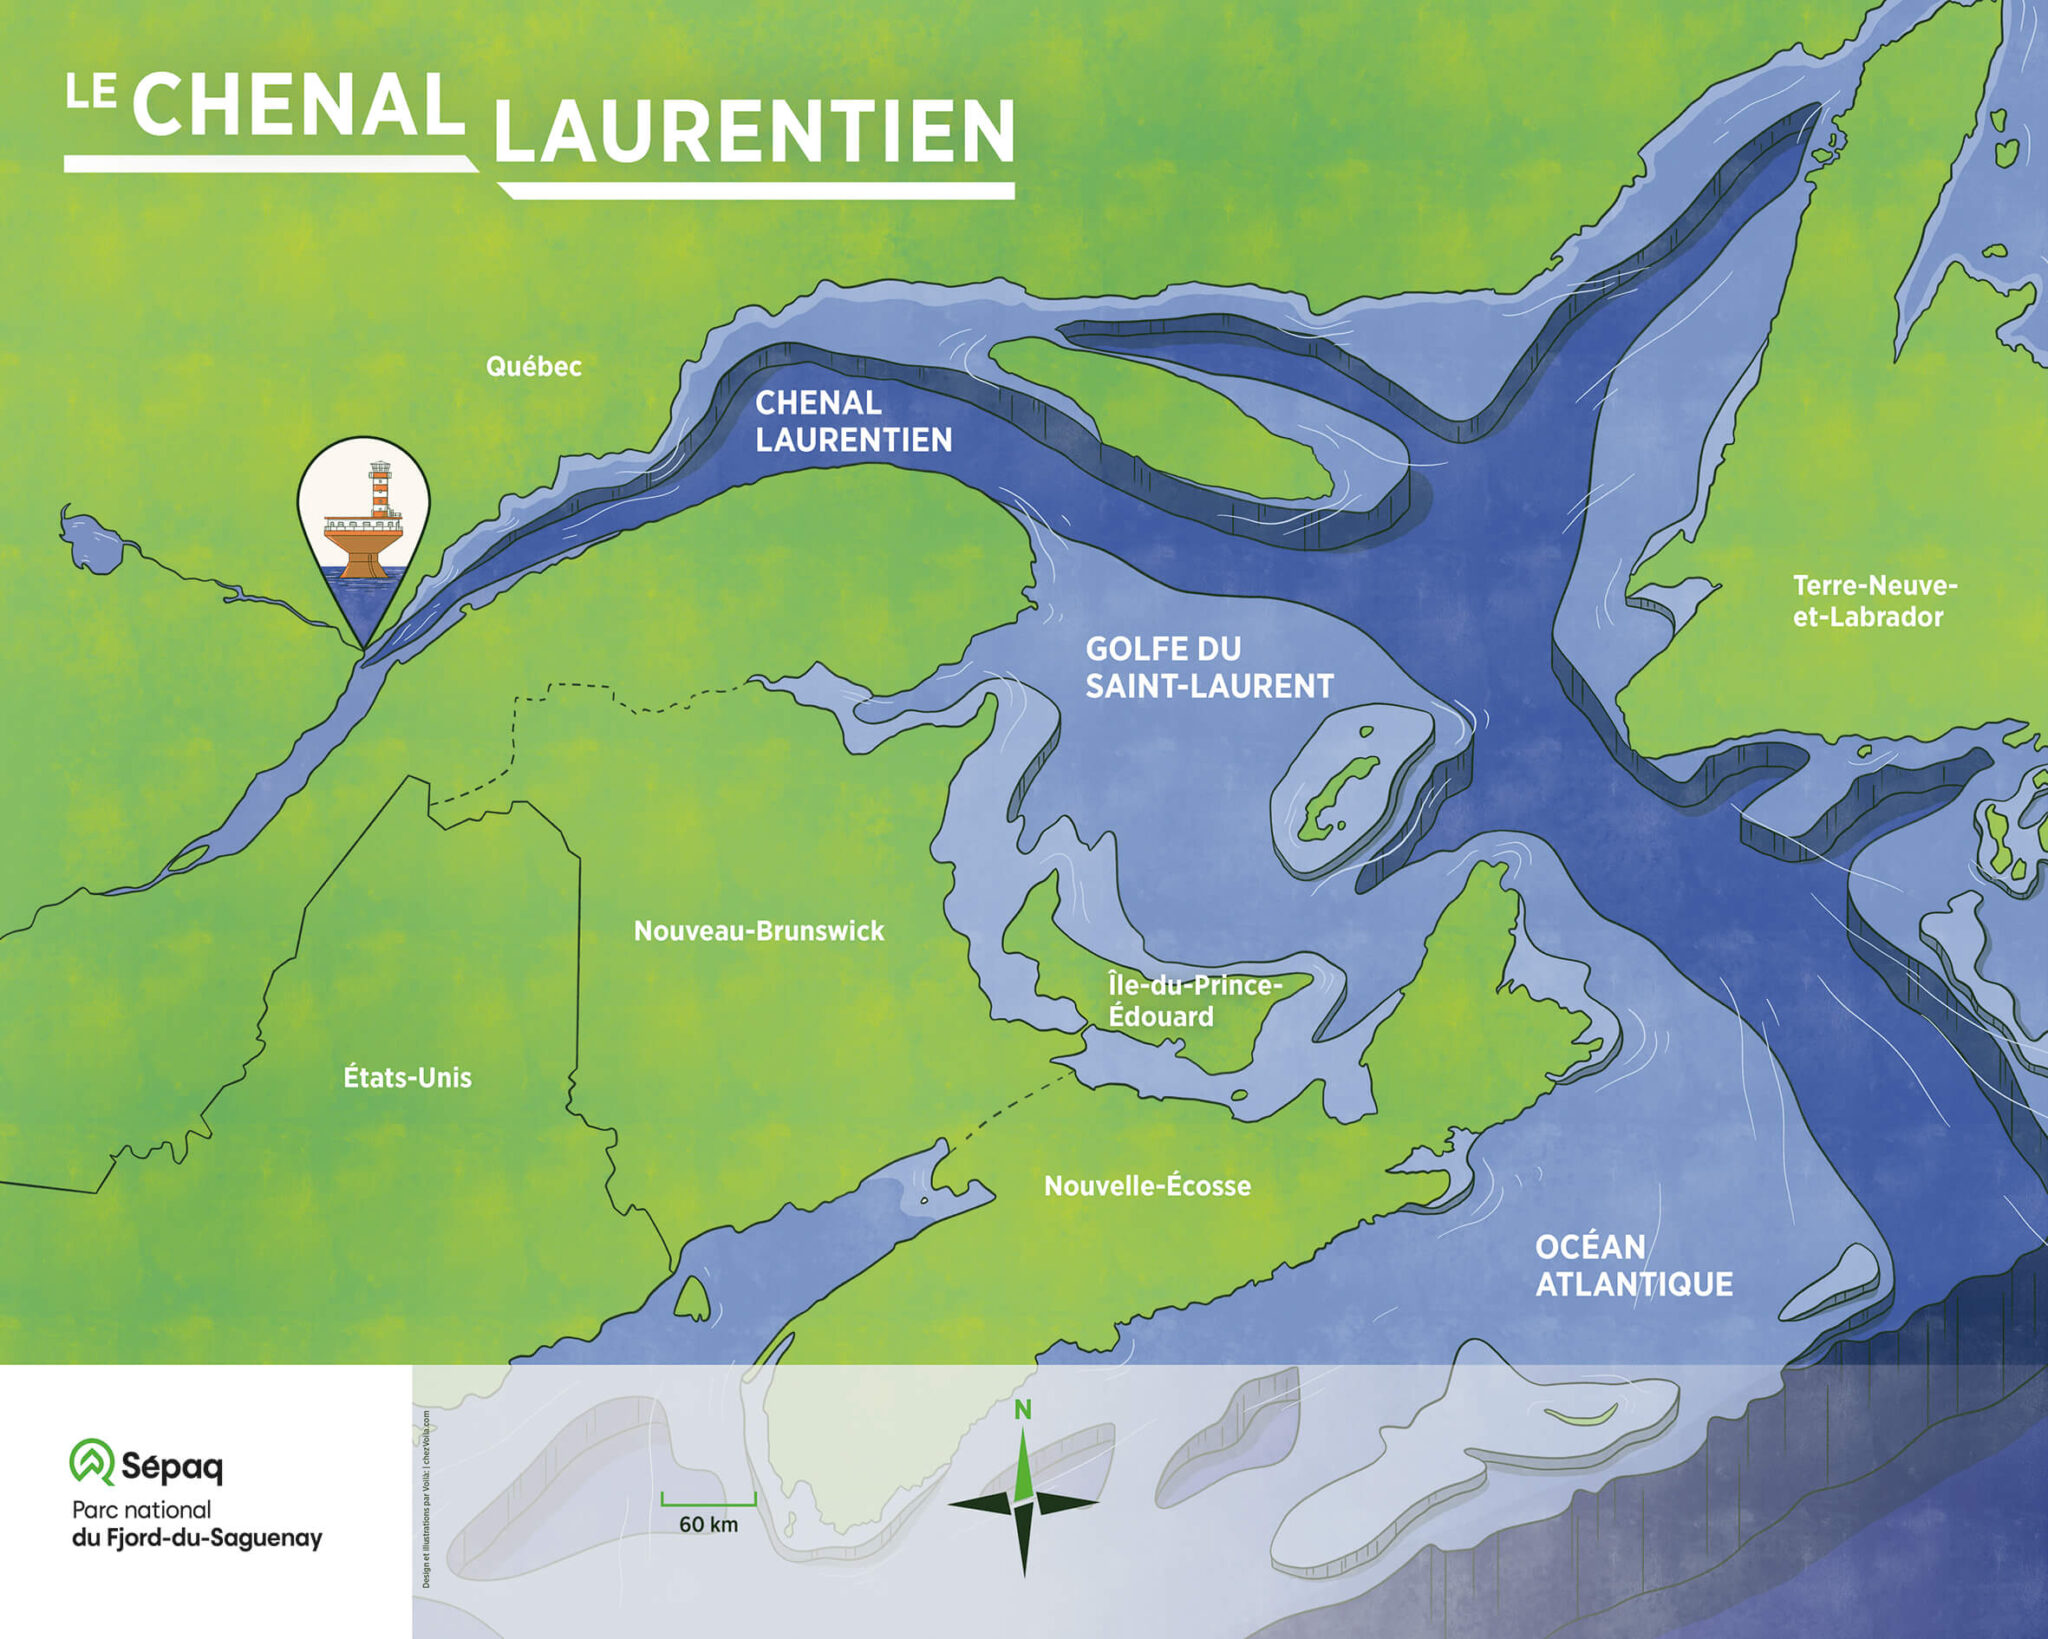 The title of the image is "The Laurentian Channel". This panel shows an illustrated aerial view of the channel. On the mainland, colored in green, the provinces of Canada around the Channel and the border with the United States serve as geographical markers. In the water, colored in blue, the Laurentian Channel, the Gulf of St. Lawrence and the Atlantic Ocean delineate the marine regions. This image shows the depth of the marine estuary. The seabed is shown in transparency below the water surface and the depth levels are exaggerated. We can see that the Atlantic Ocean is the deepest part, but also that the entire Laurentian Channel is very deep, all the way to its tip at Tadoussac. Tadoussac is pointed out by a small sticker containing an illustration of the Tadoussac lighthouse, allowing the public to locate where they are. At the bottom of the panel, a compass rose indicates that North is towards the top of the panel.